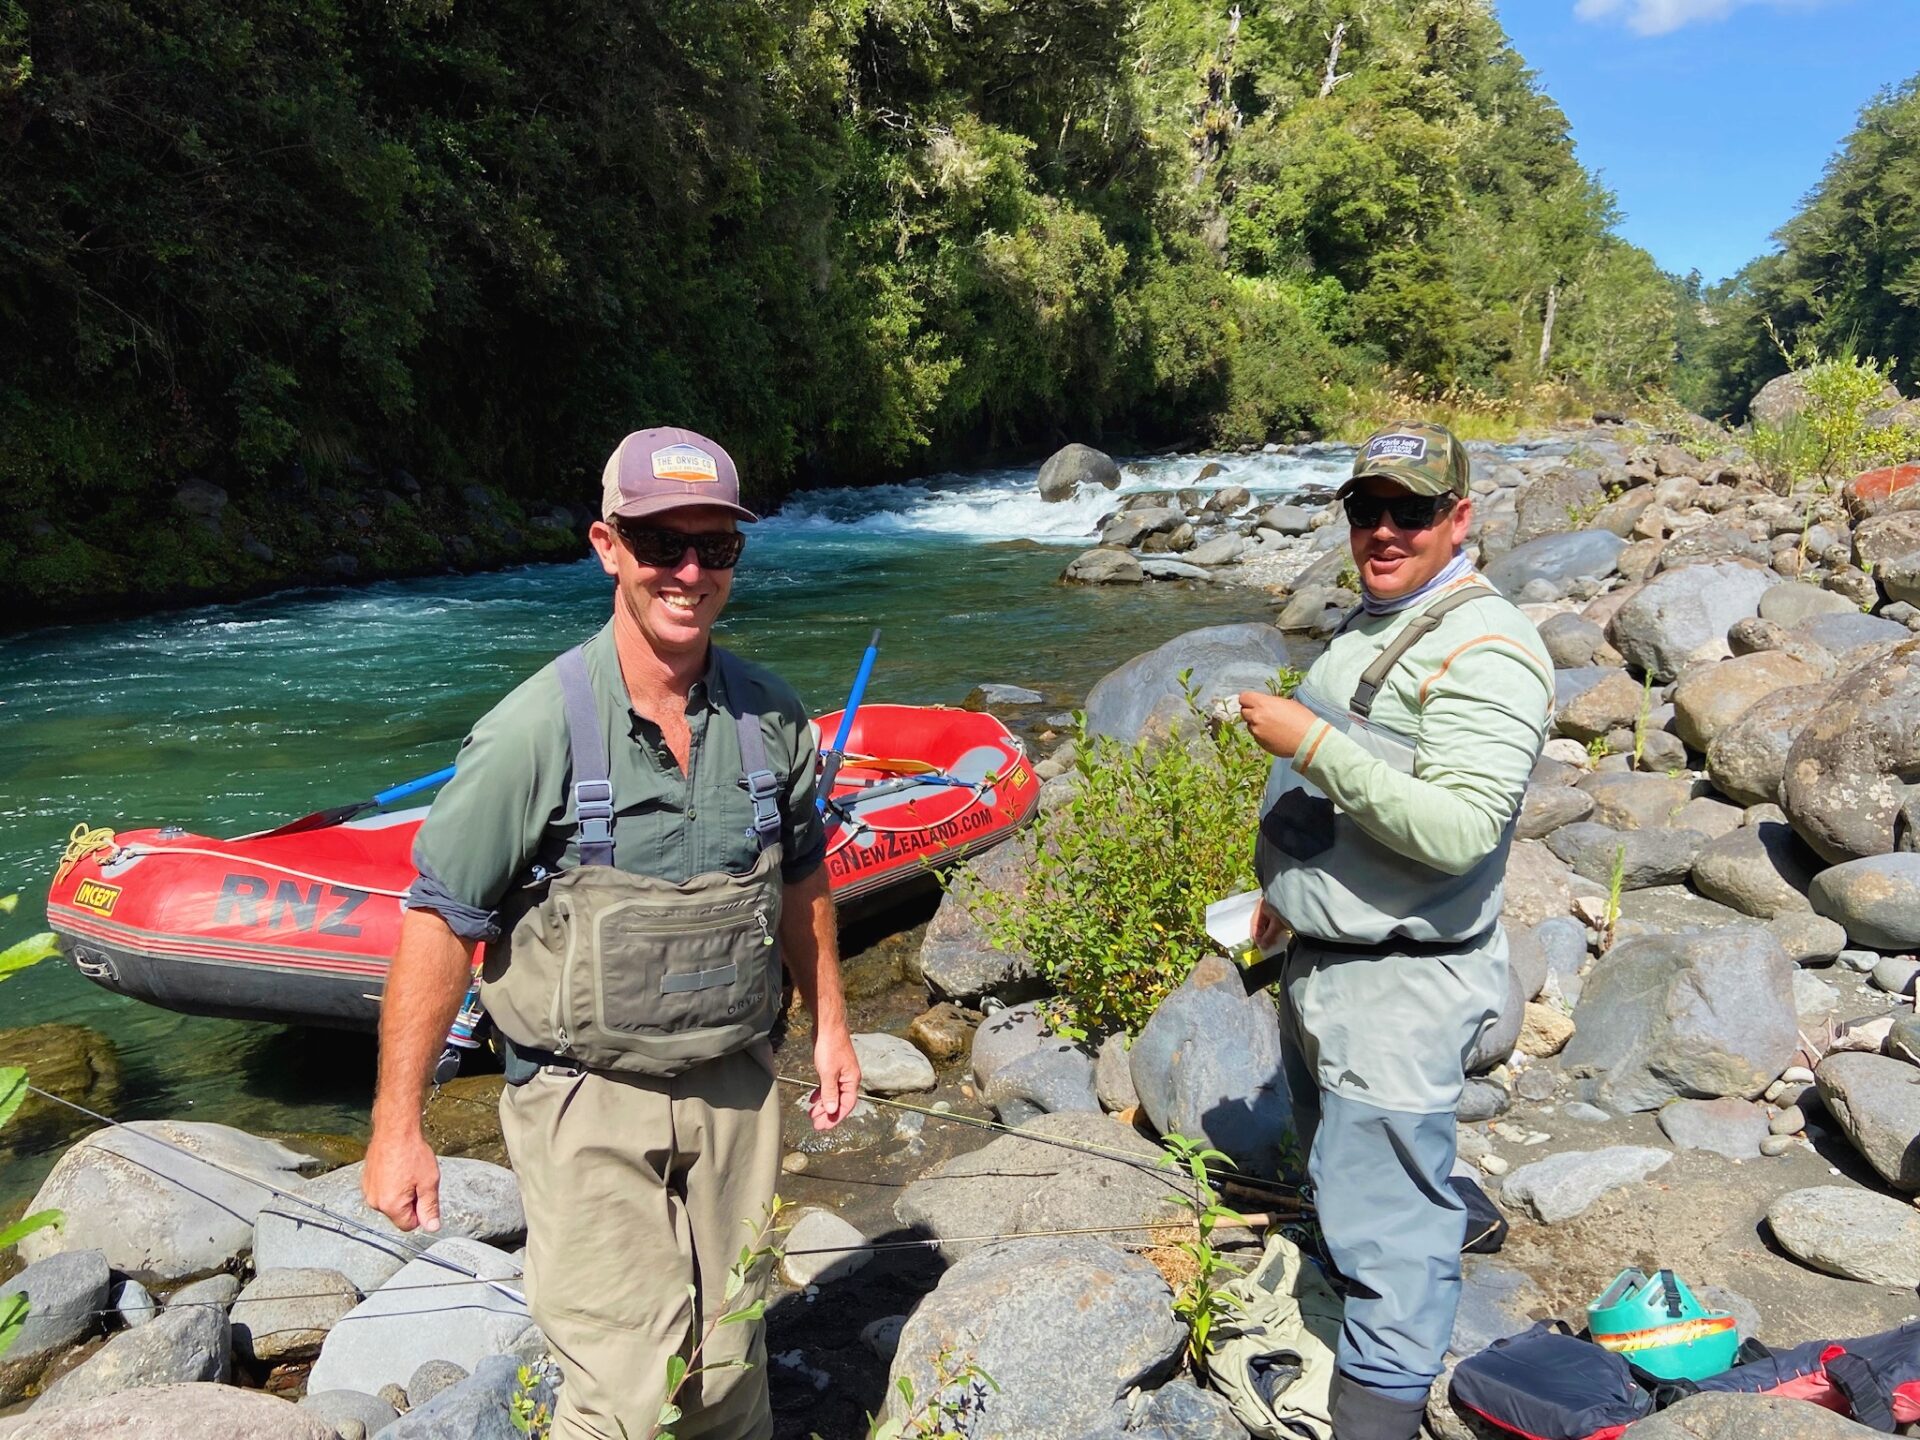 The best fly fishing spots in Tongariro are just a raft trip away with Chris Jolly Outdoors!